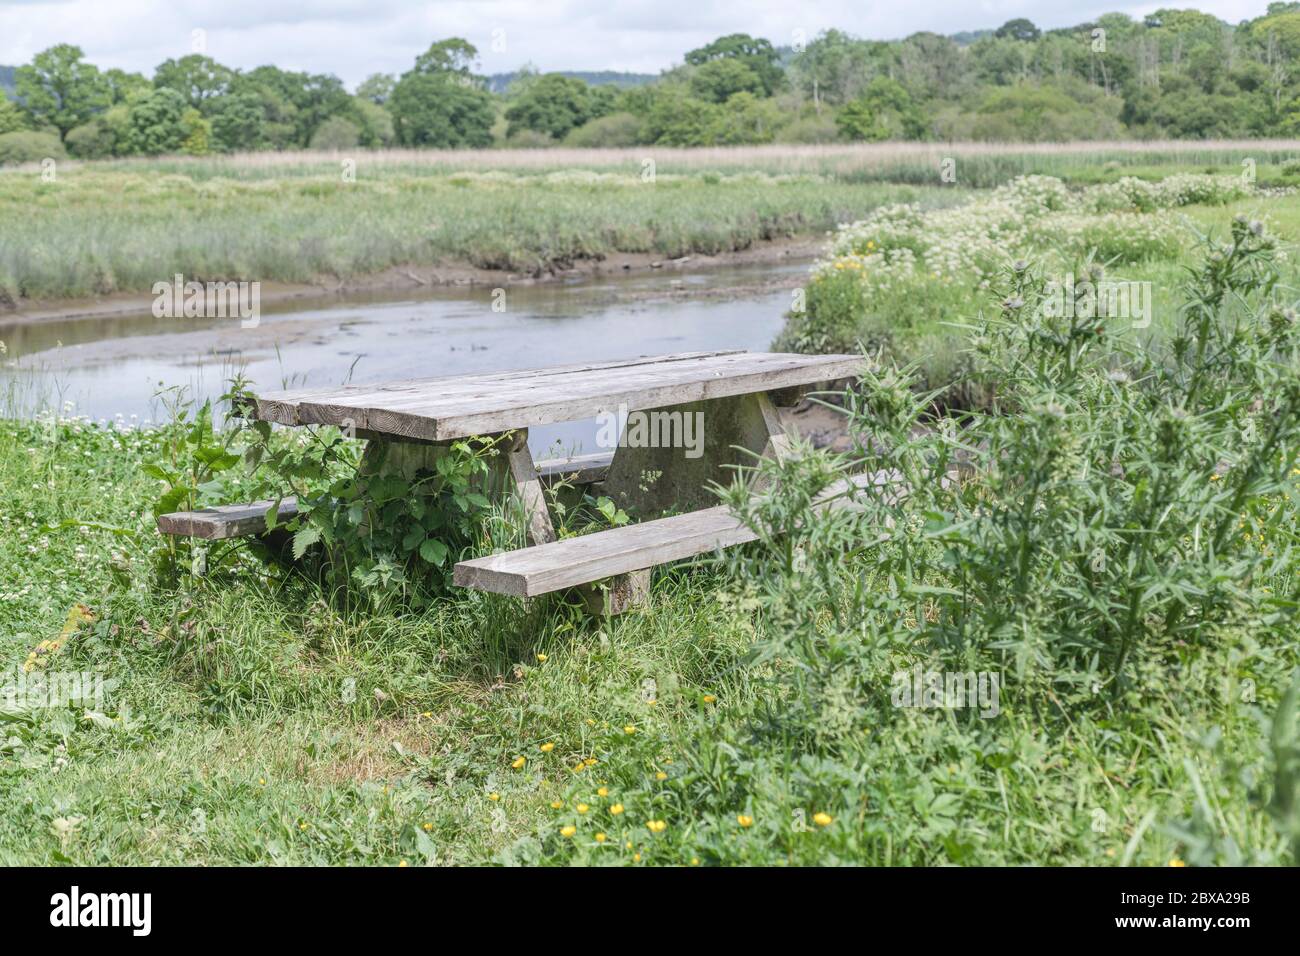 Empty public picnic table in sunshine beside the waters of the River Fowey at Lostwithiel, Metaphor empty public spaces during Covid-10 lockdown. Stock Photo